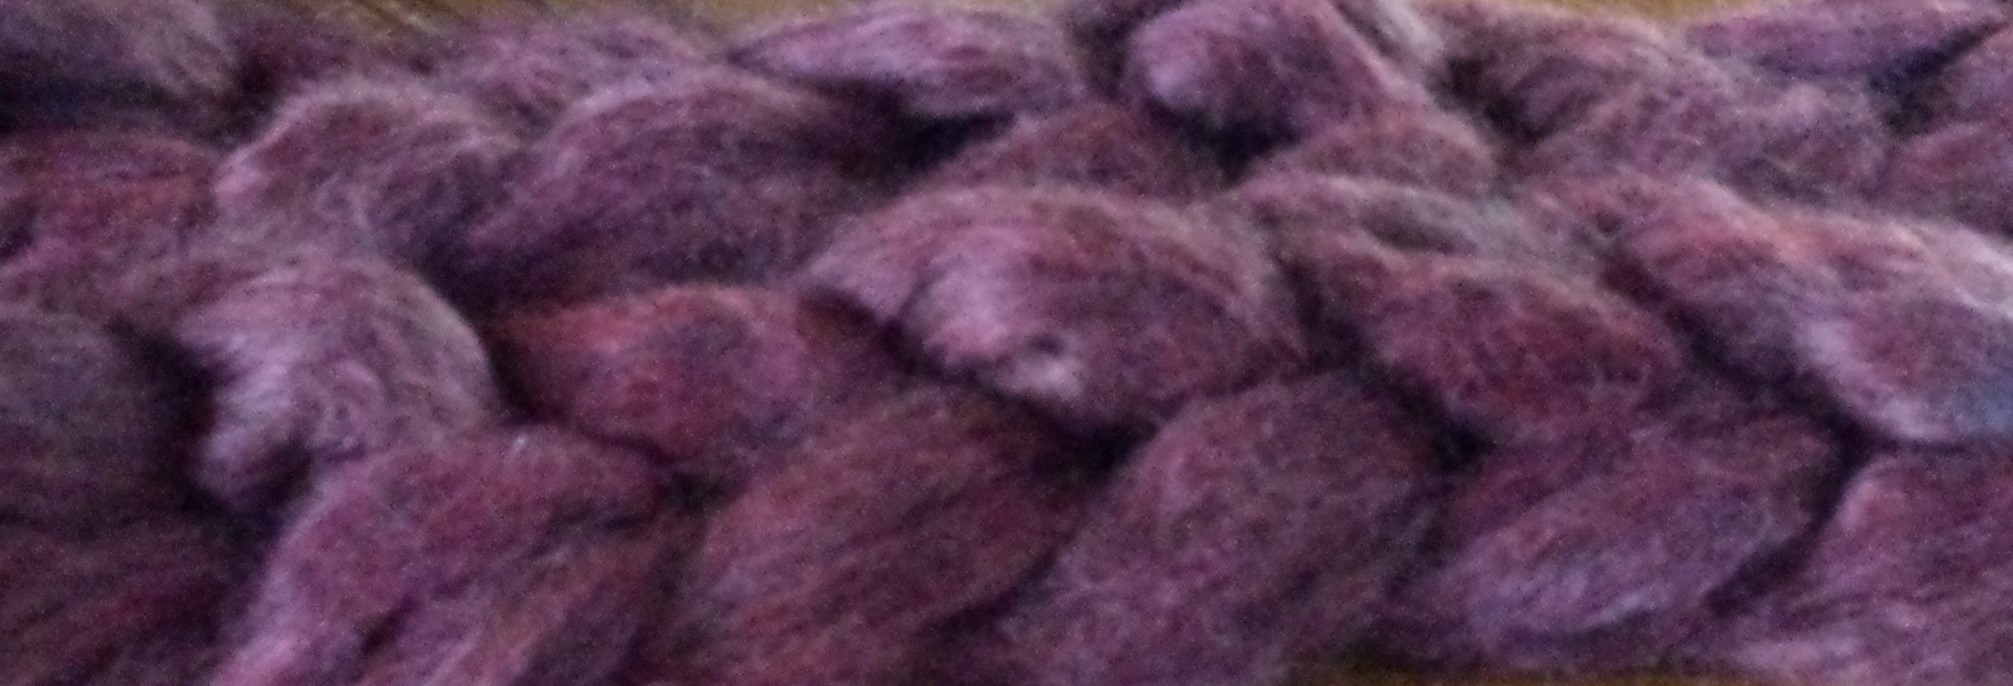 Bewitching Fibers Hand Dyed Gotland Lambswool Combed Top - 3.5 oz - Brick